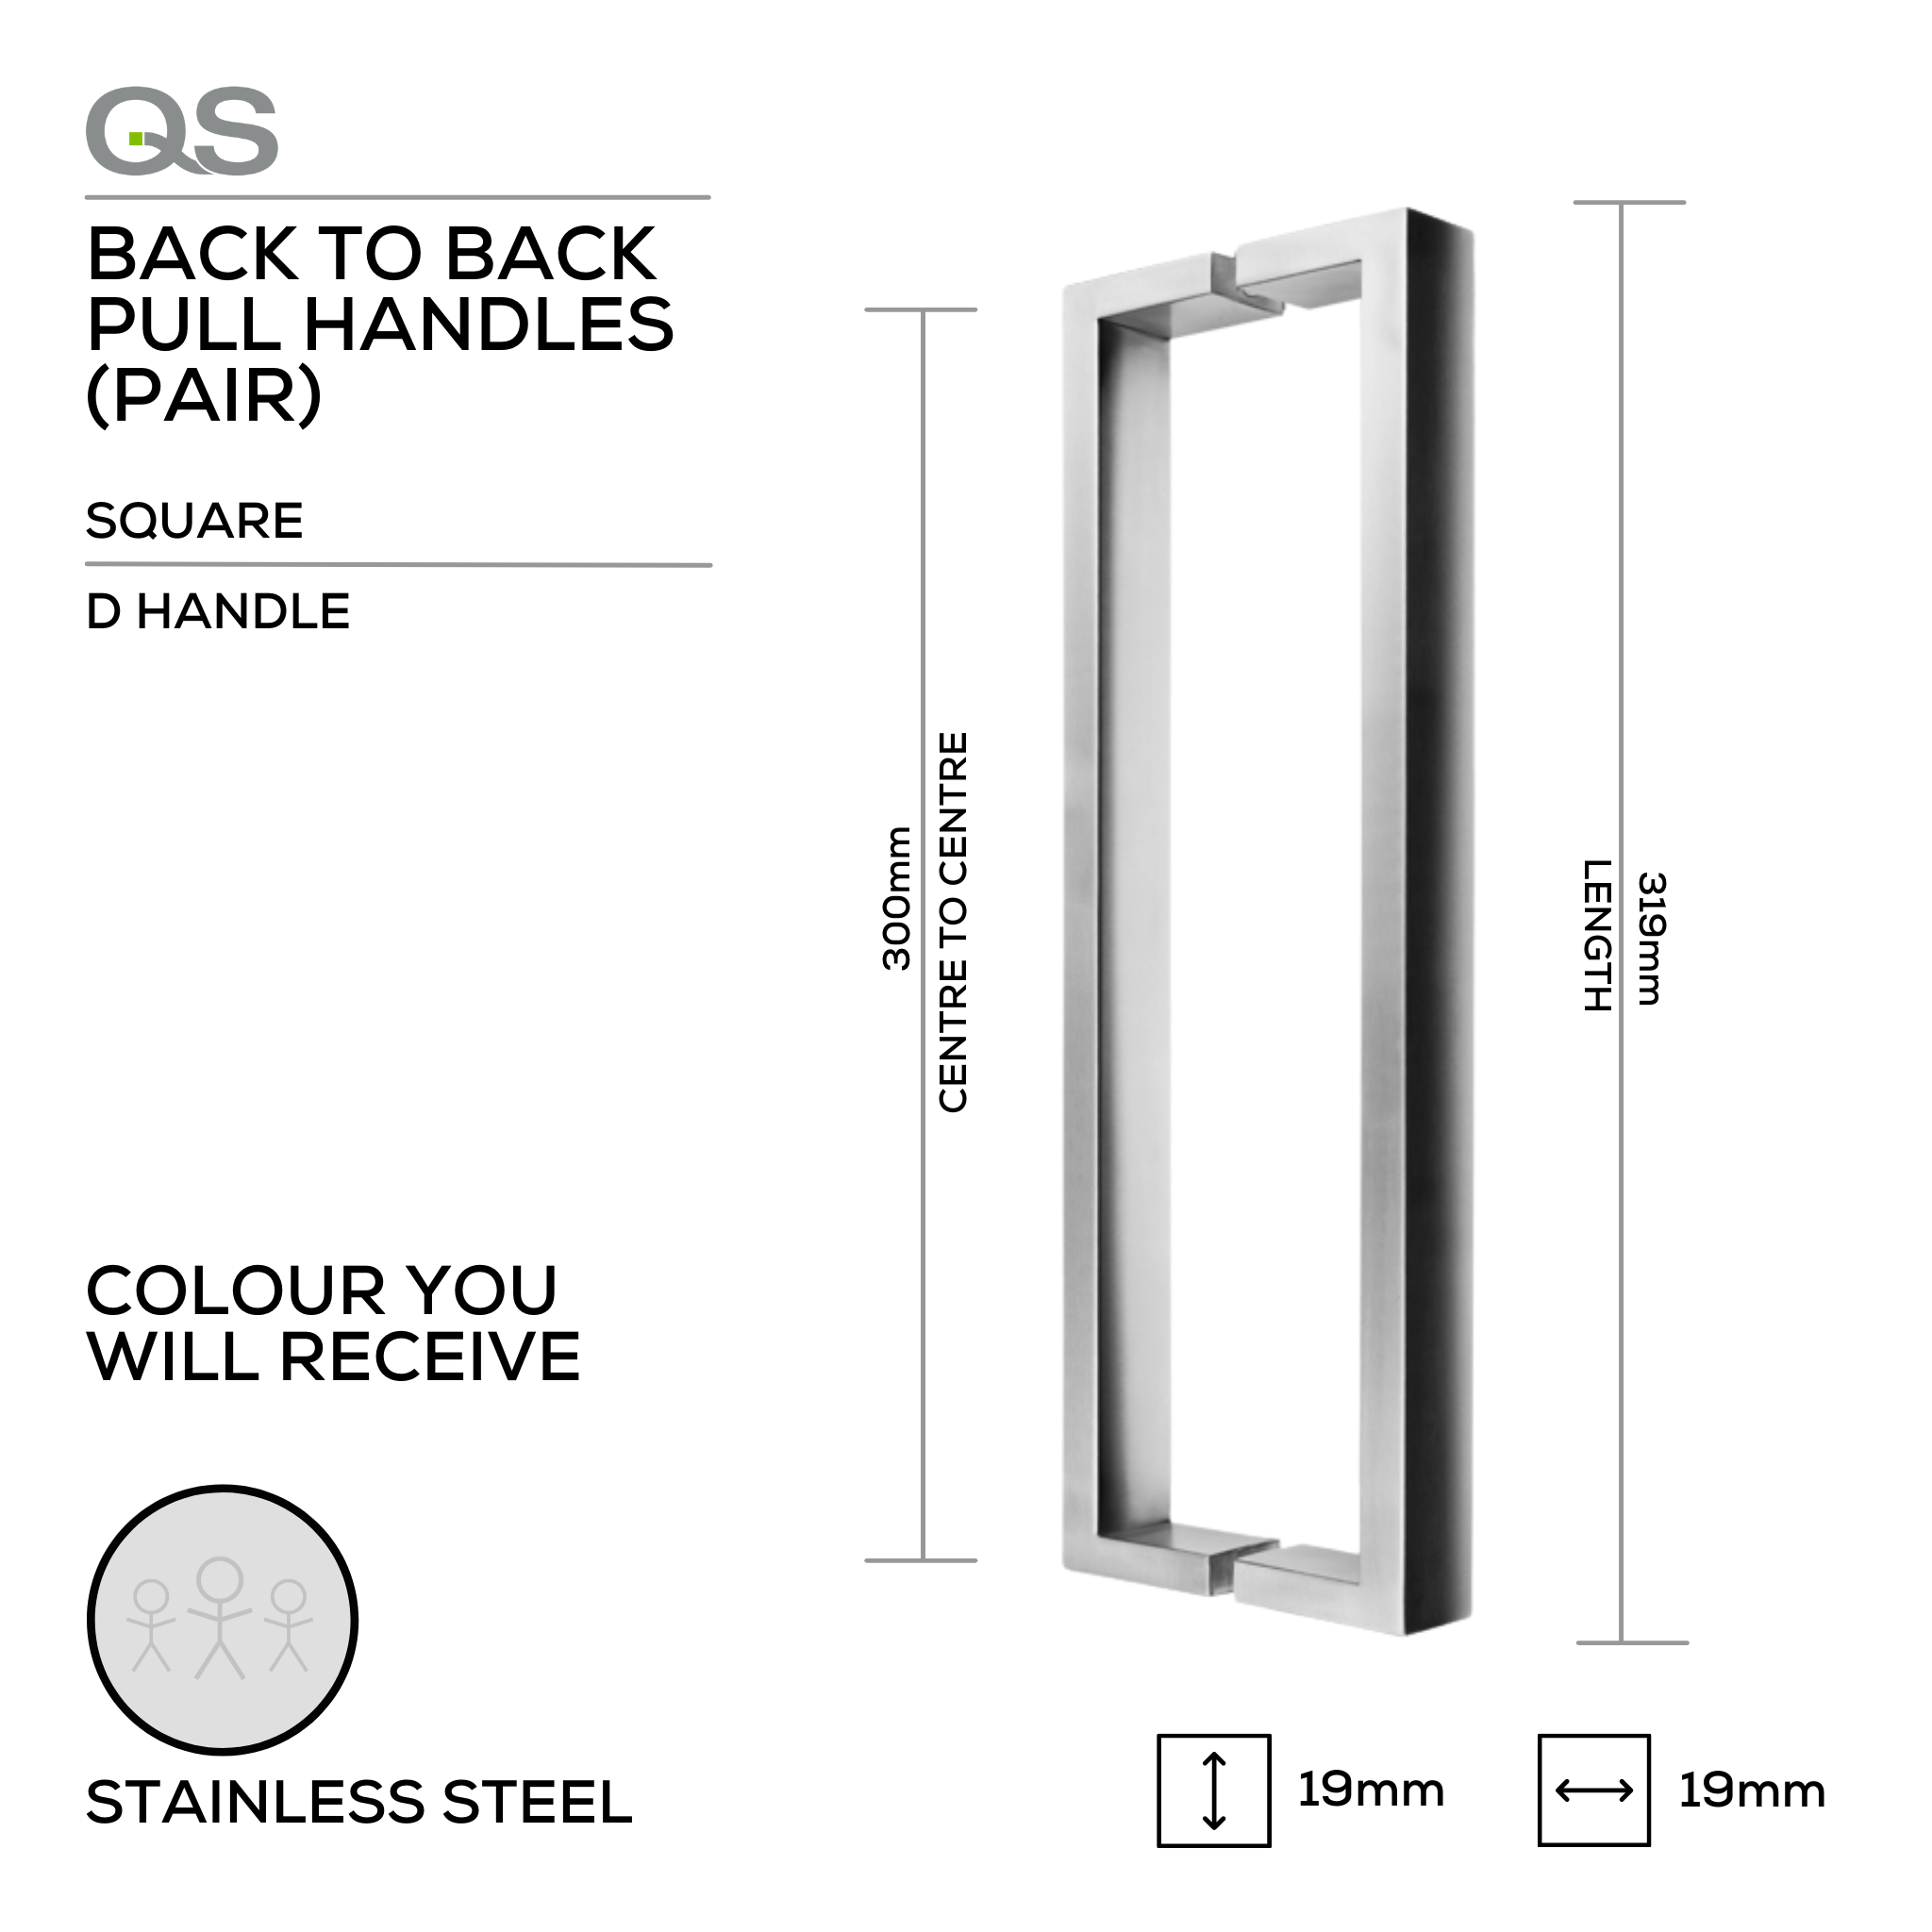 QS2622 SQ SECT, Pull Handle, Square, D Handle, BTB, 19mm (d) x 319mm (l) x 300mm (ctc), Stainless Steel, QS